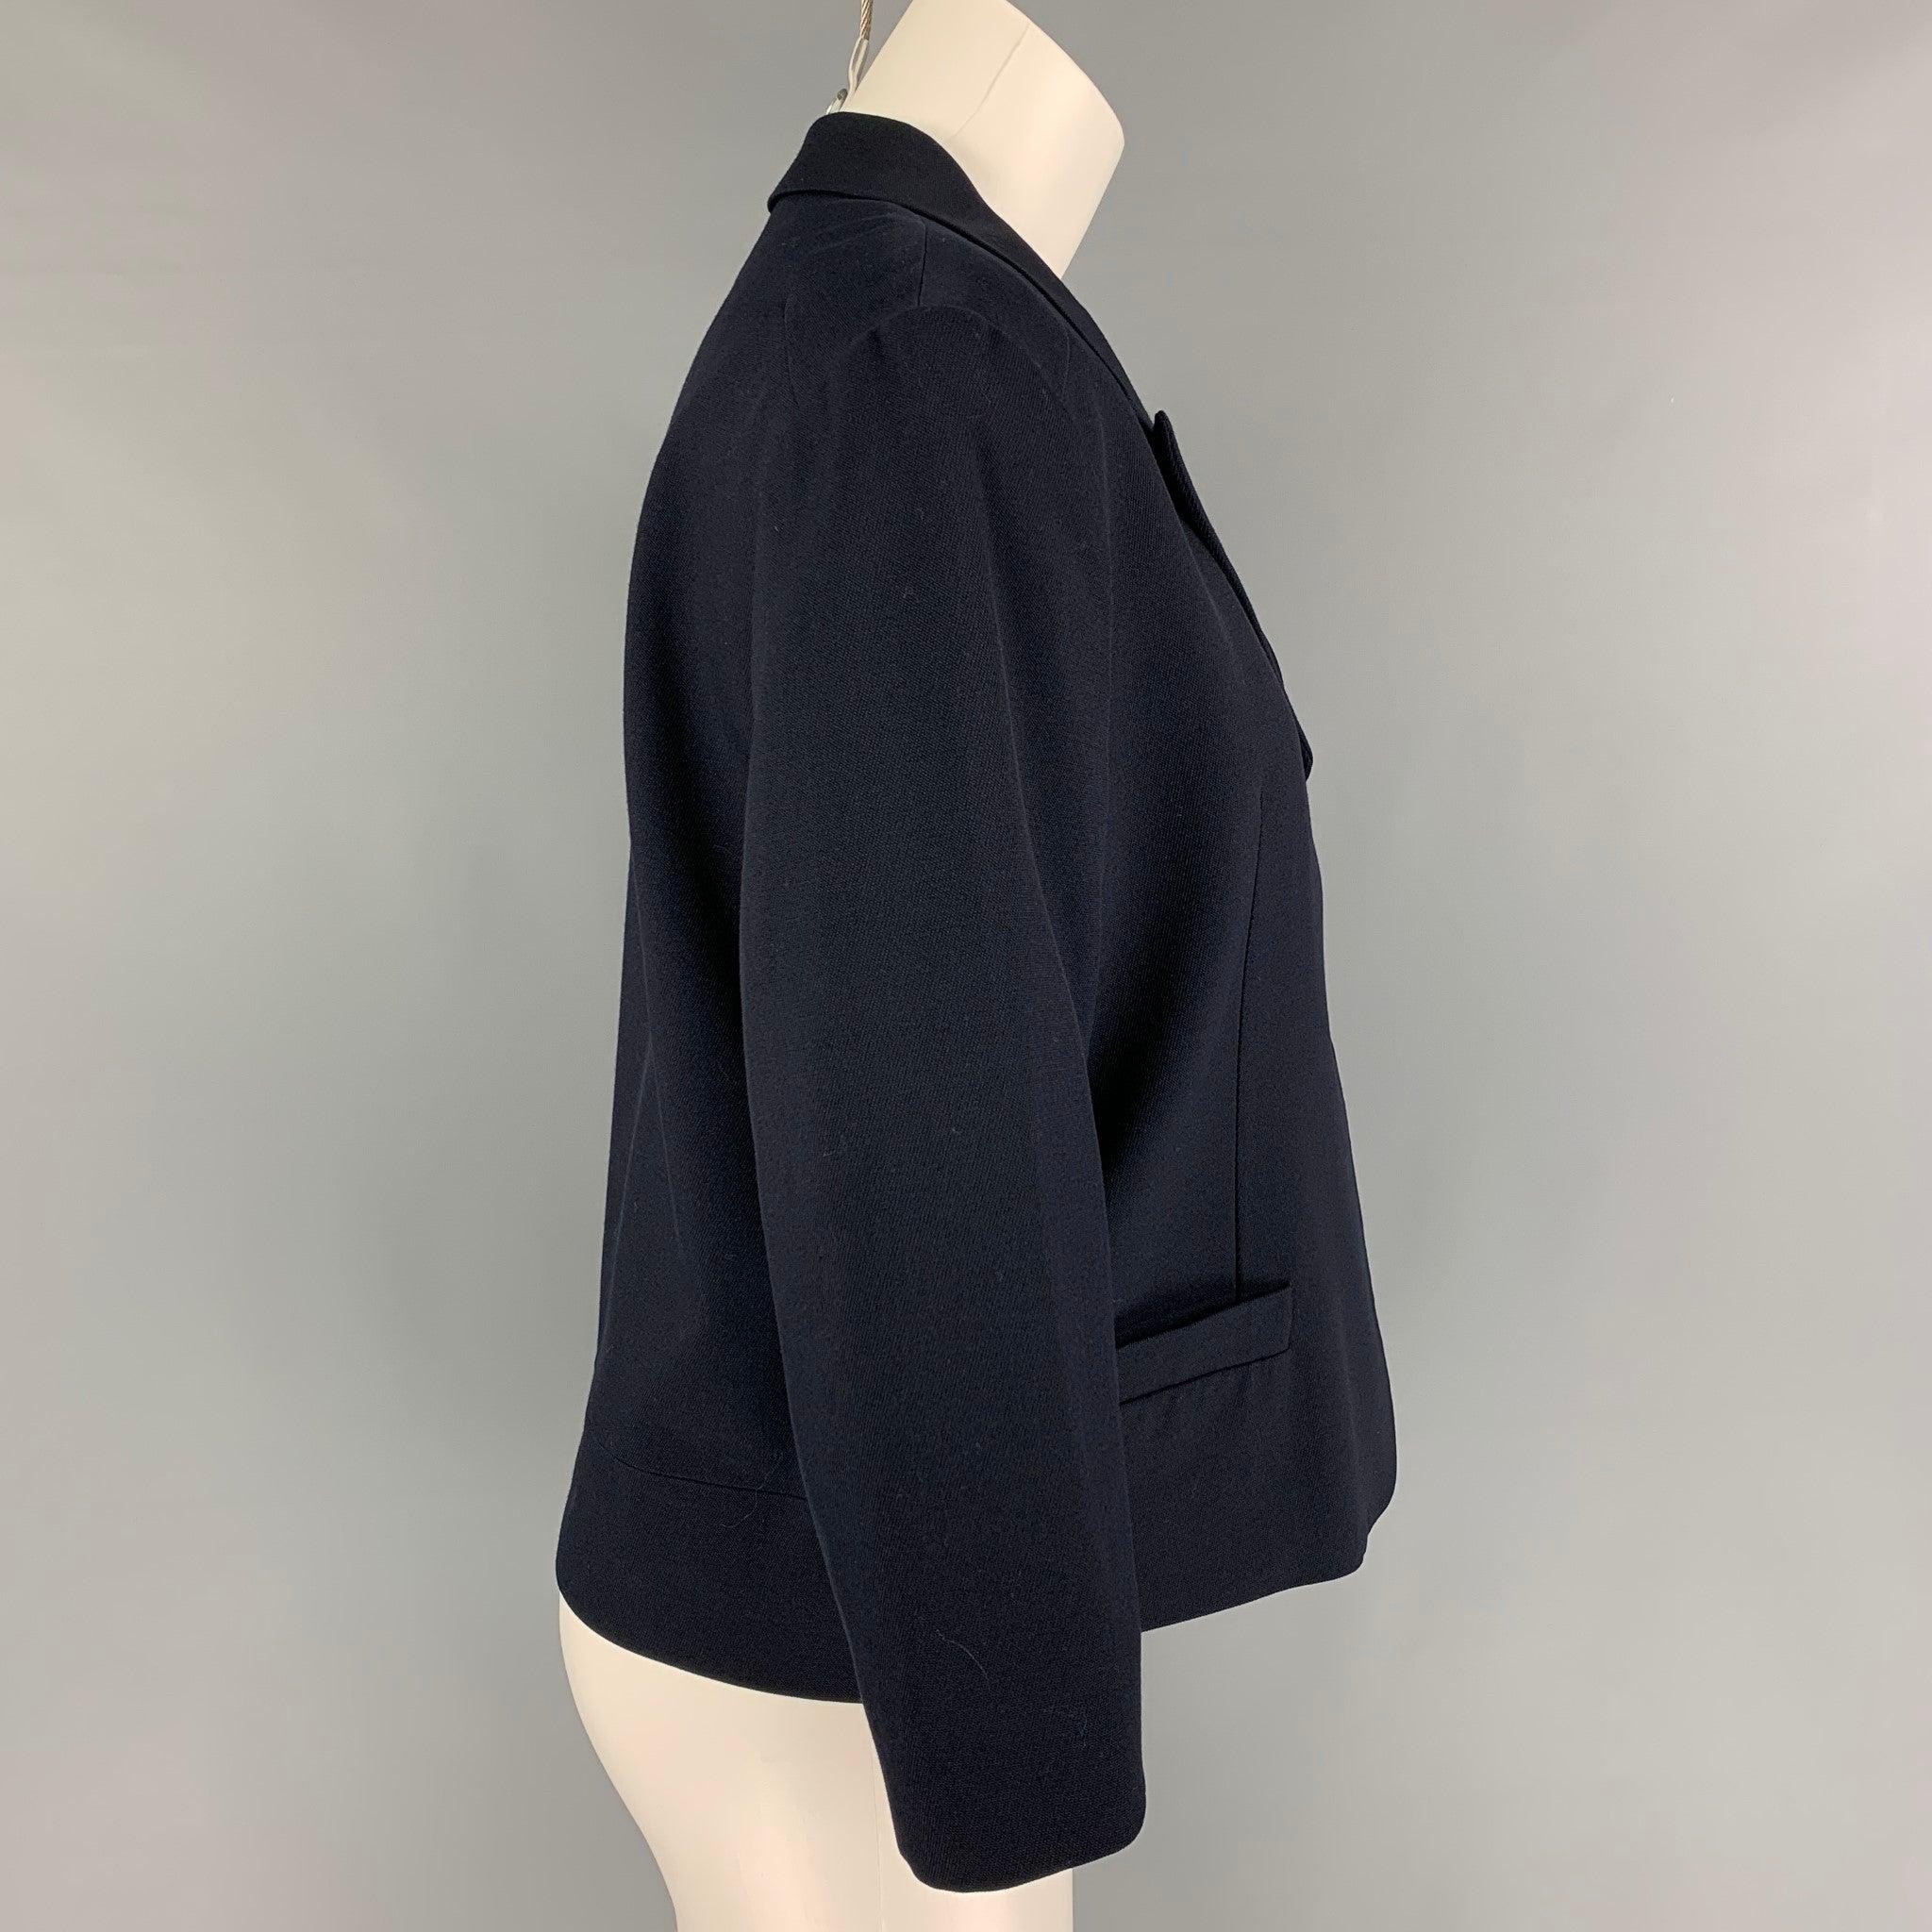 DRIES VAN NOTEN jacket comes in a navy wool blend featuring a cropped style, peak lapel, front pockets, and a snap button closure.
Very Good
Pre-Owned Condition. 

Marked:   40 

Measurements: 
 
Shoulder: 17.5 inches  Bust: 40 inches  Sleeve: 18.5